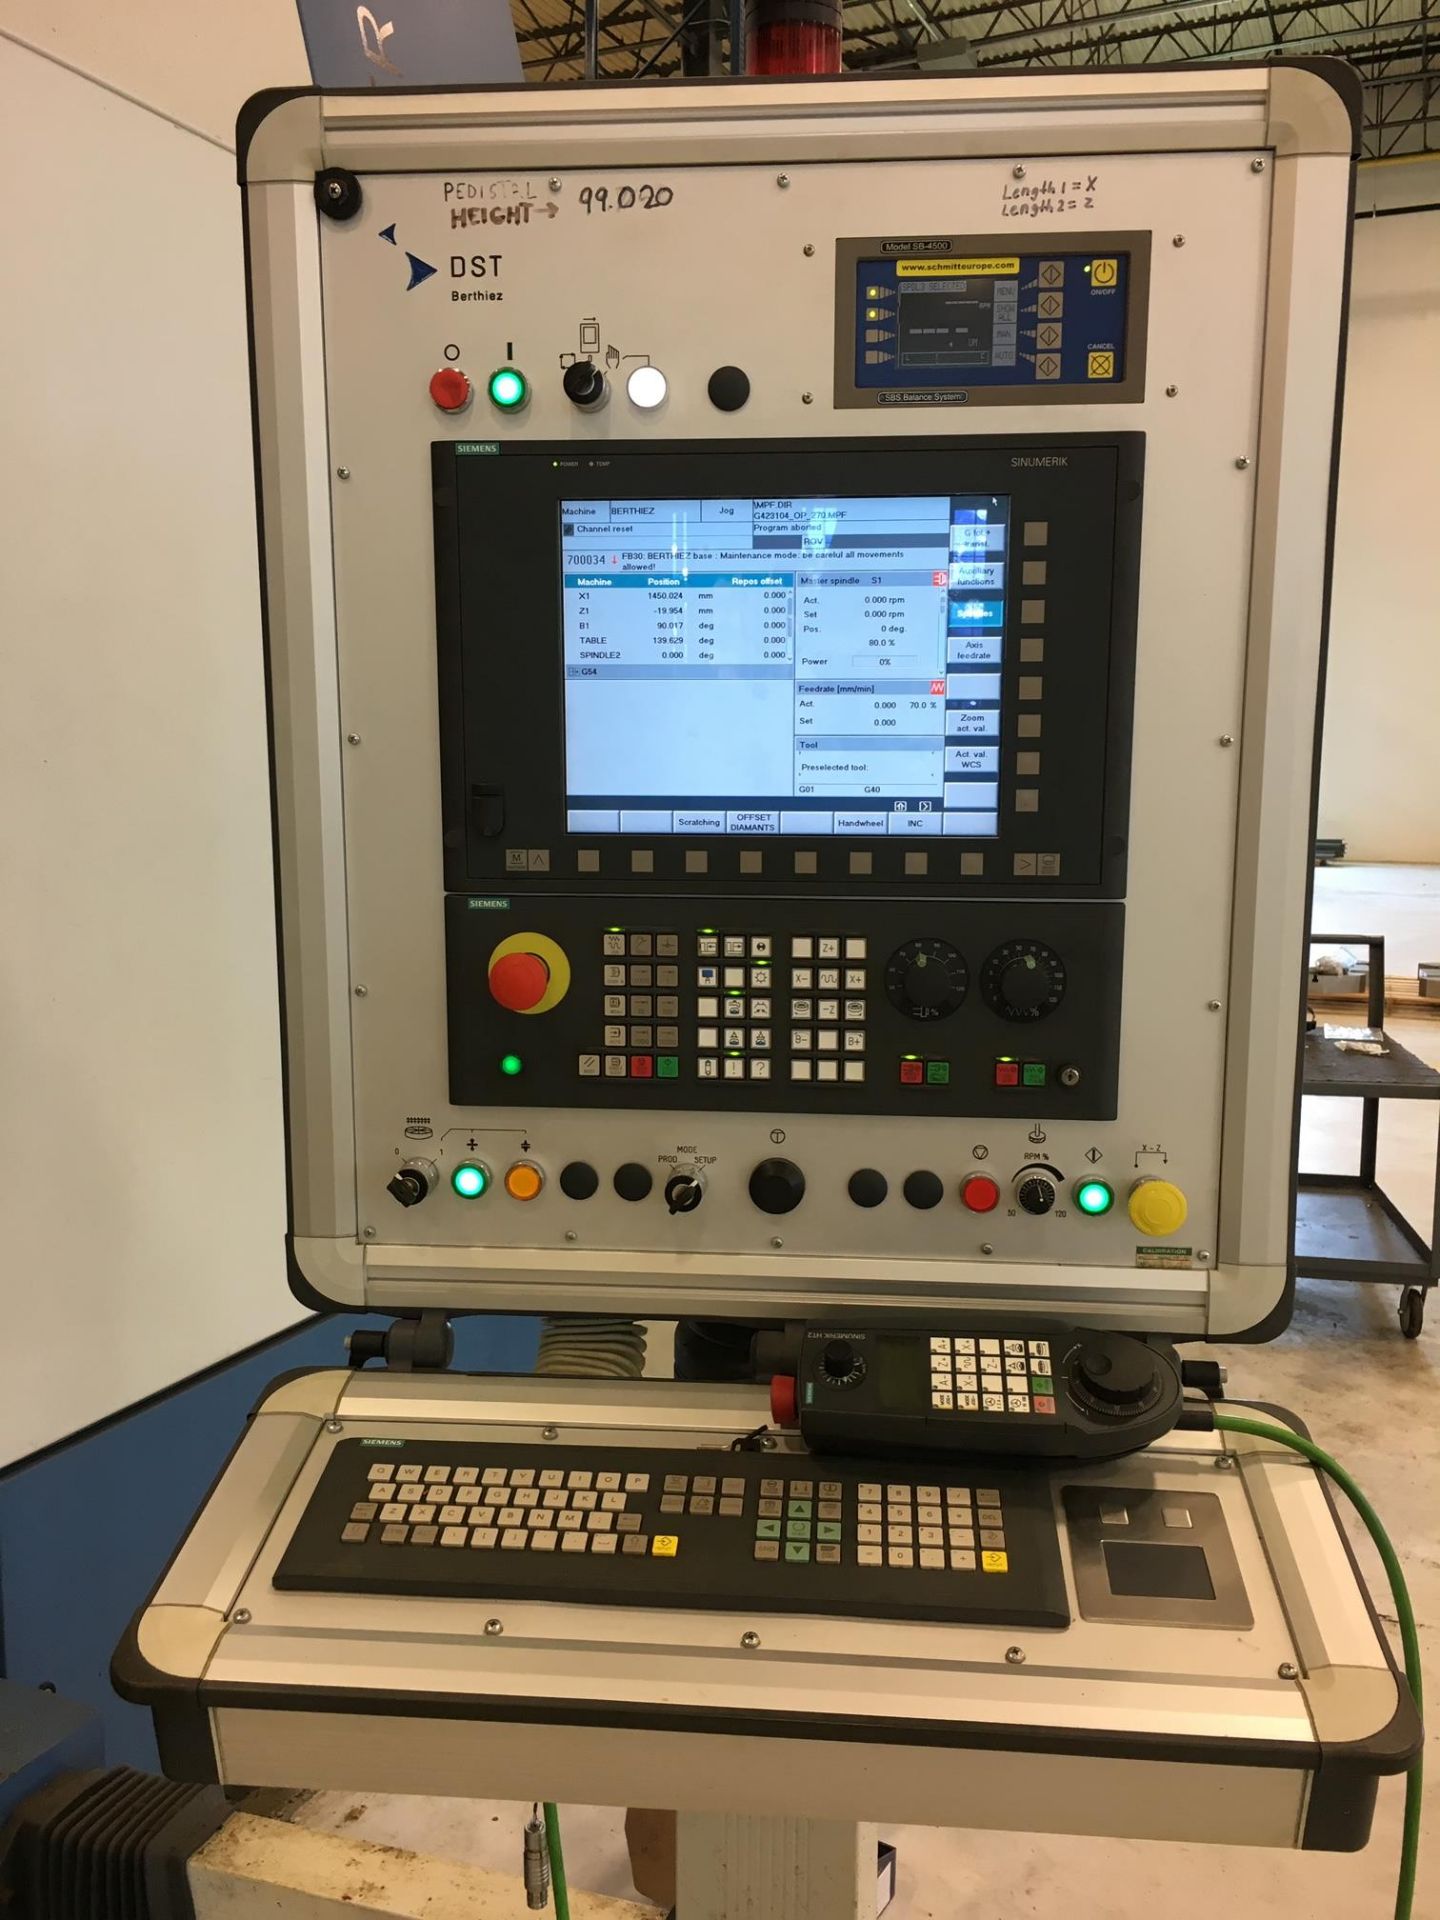 BERTHIEZ MODEL RVU 900/80 ID/OD, WITH TURNING, VERTICAL CNC GRINDER; S/N 4219, 84OD SIEMENS CONTROL - Image 26 of 33